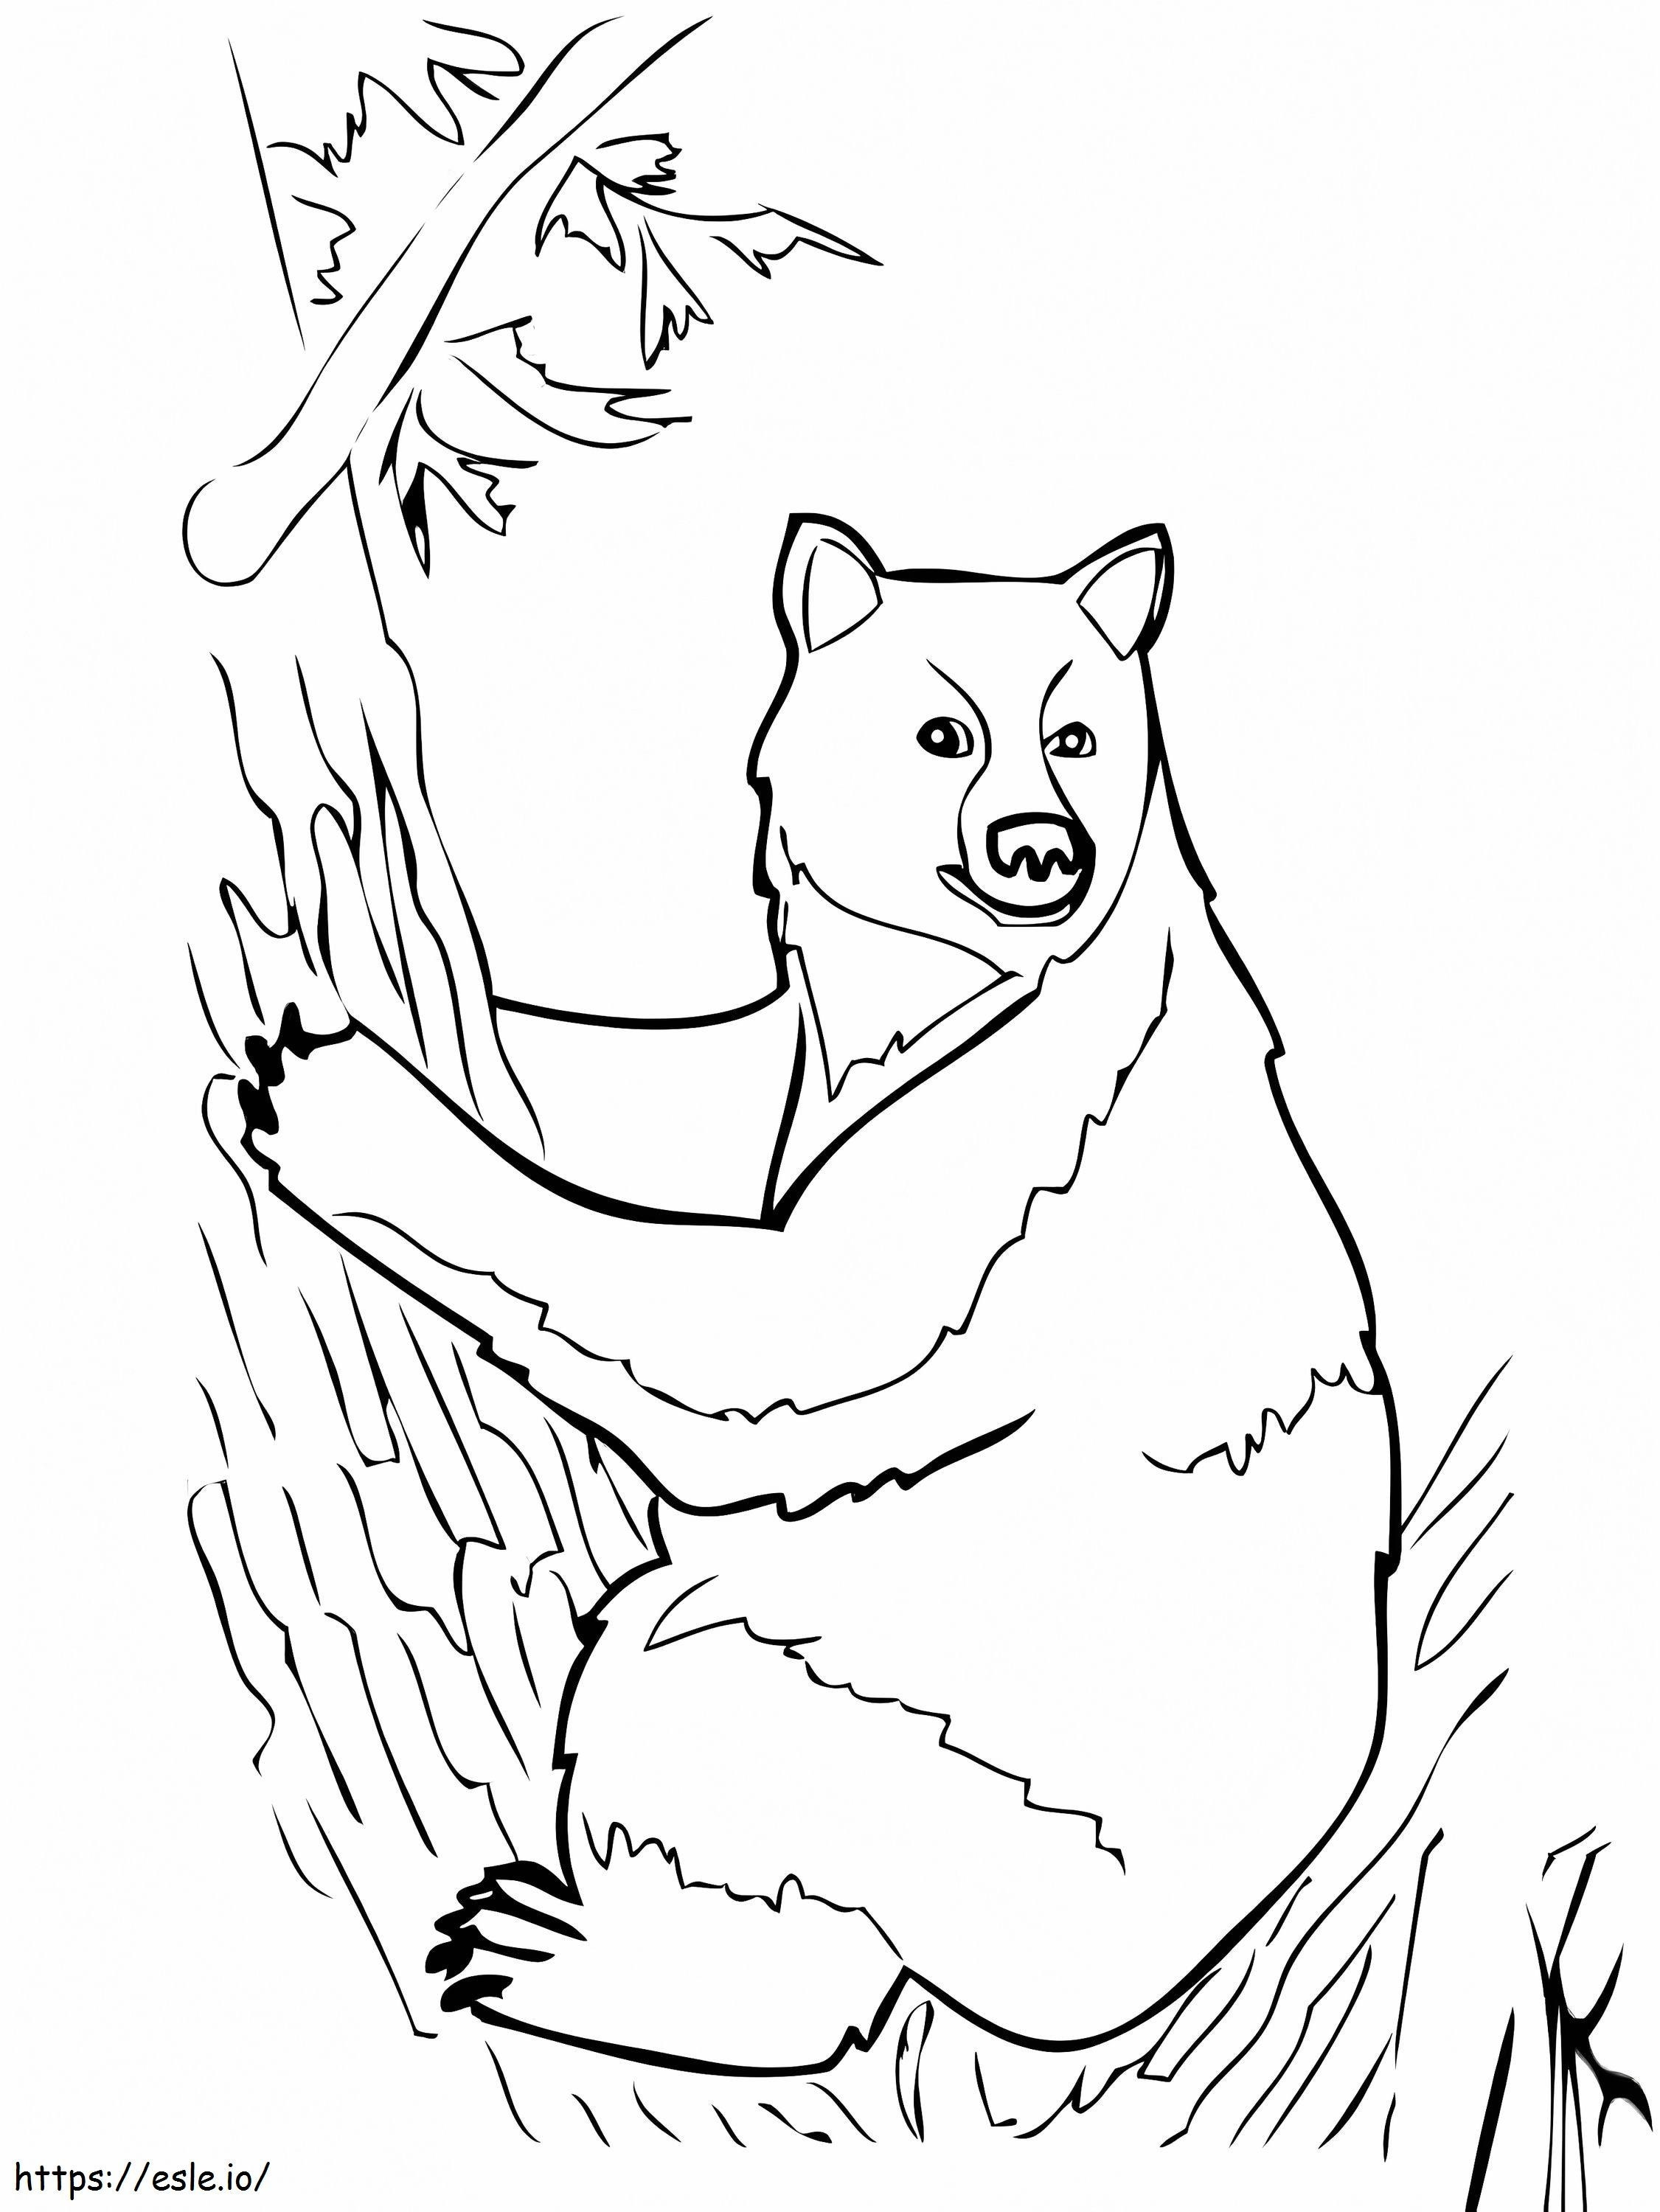 Black Bear In The Tree coloring page